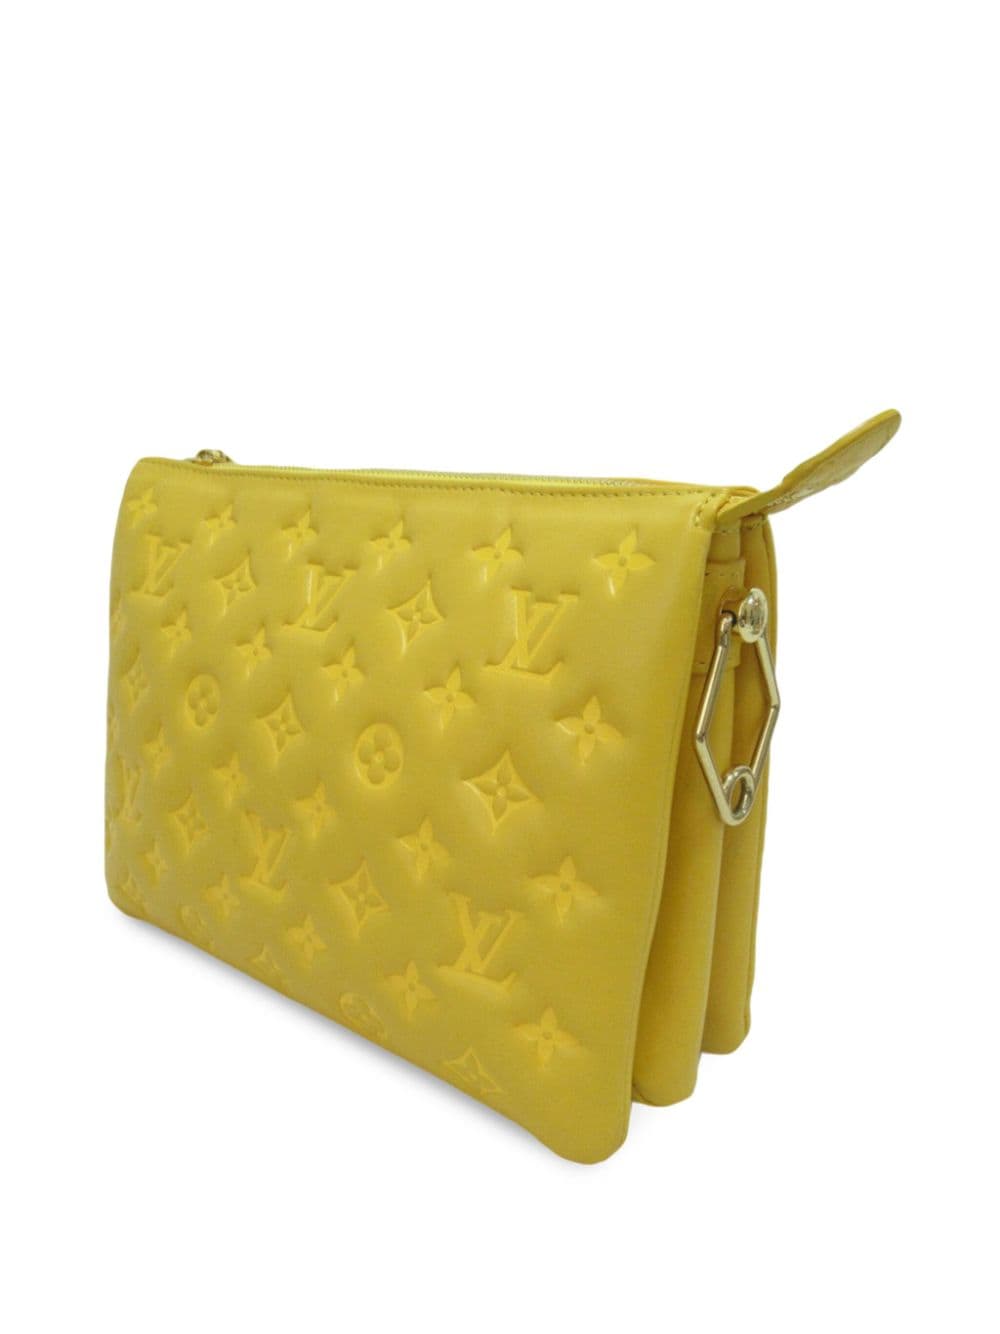 Pre-owned Louis Vuitton 2002  Coussin Pm Shoulder Bag In Yellow